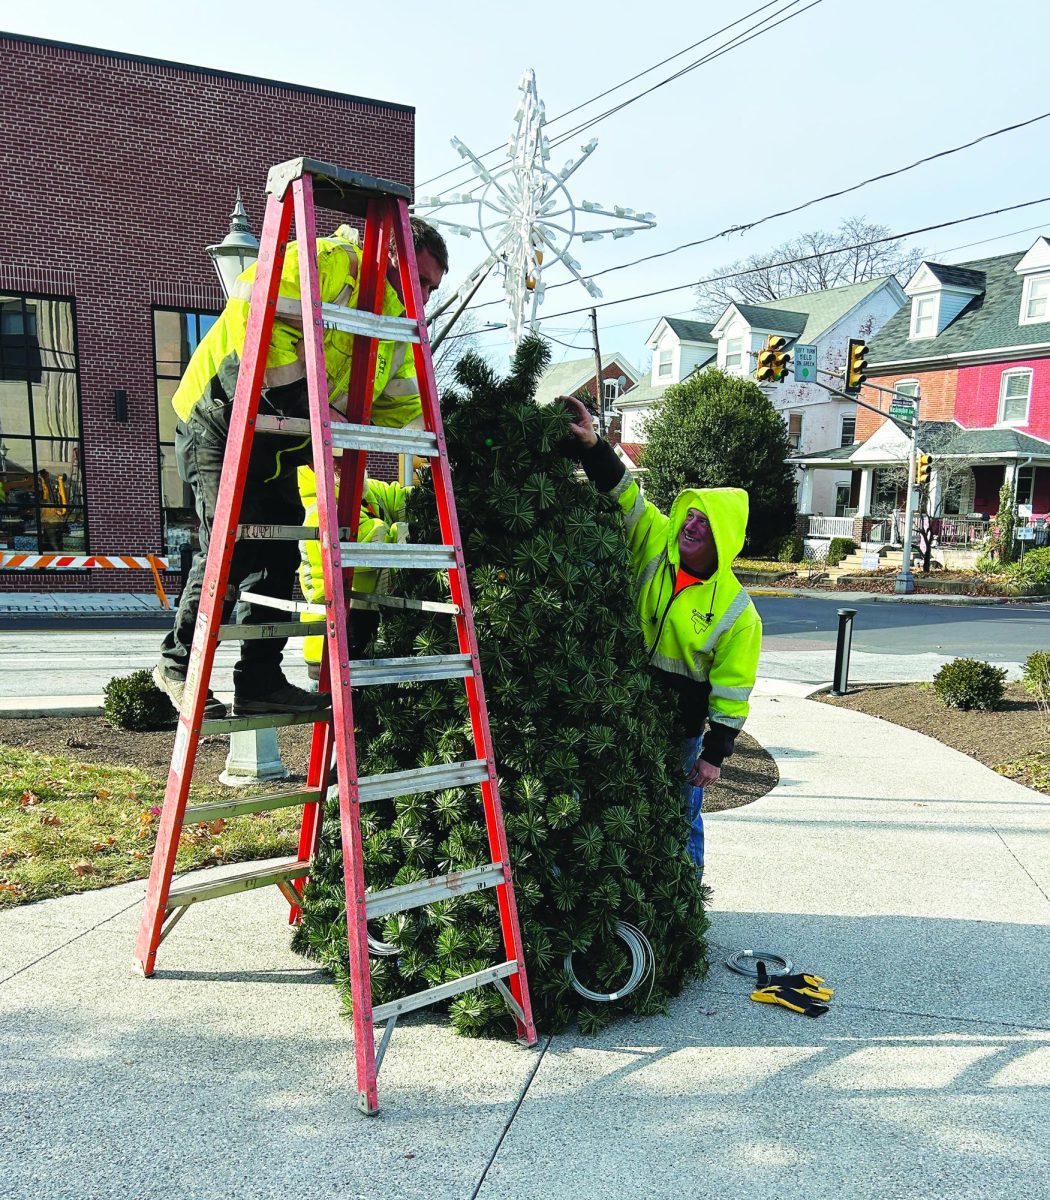 %E2%80%98Tis+the+season...Preparing+for+Souderton%E2%80%99s+annual+tree+lighting+on+December+1%2C+Public+Works+employees+%28from+left%29+Seth+Renner%2C+Dave+Yoder+and+Tim+Kelly+put+together+the+top+of+the+tree+in+Univest%E2%80%99s+parking+lot.+